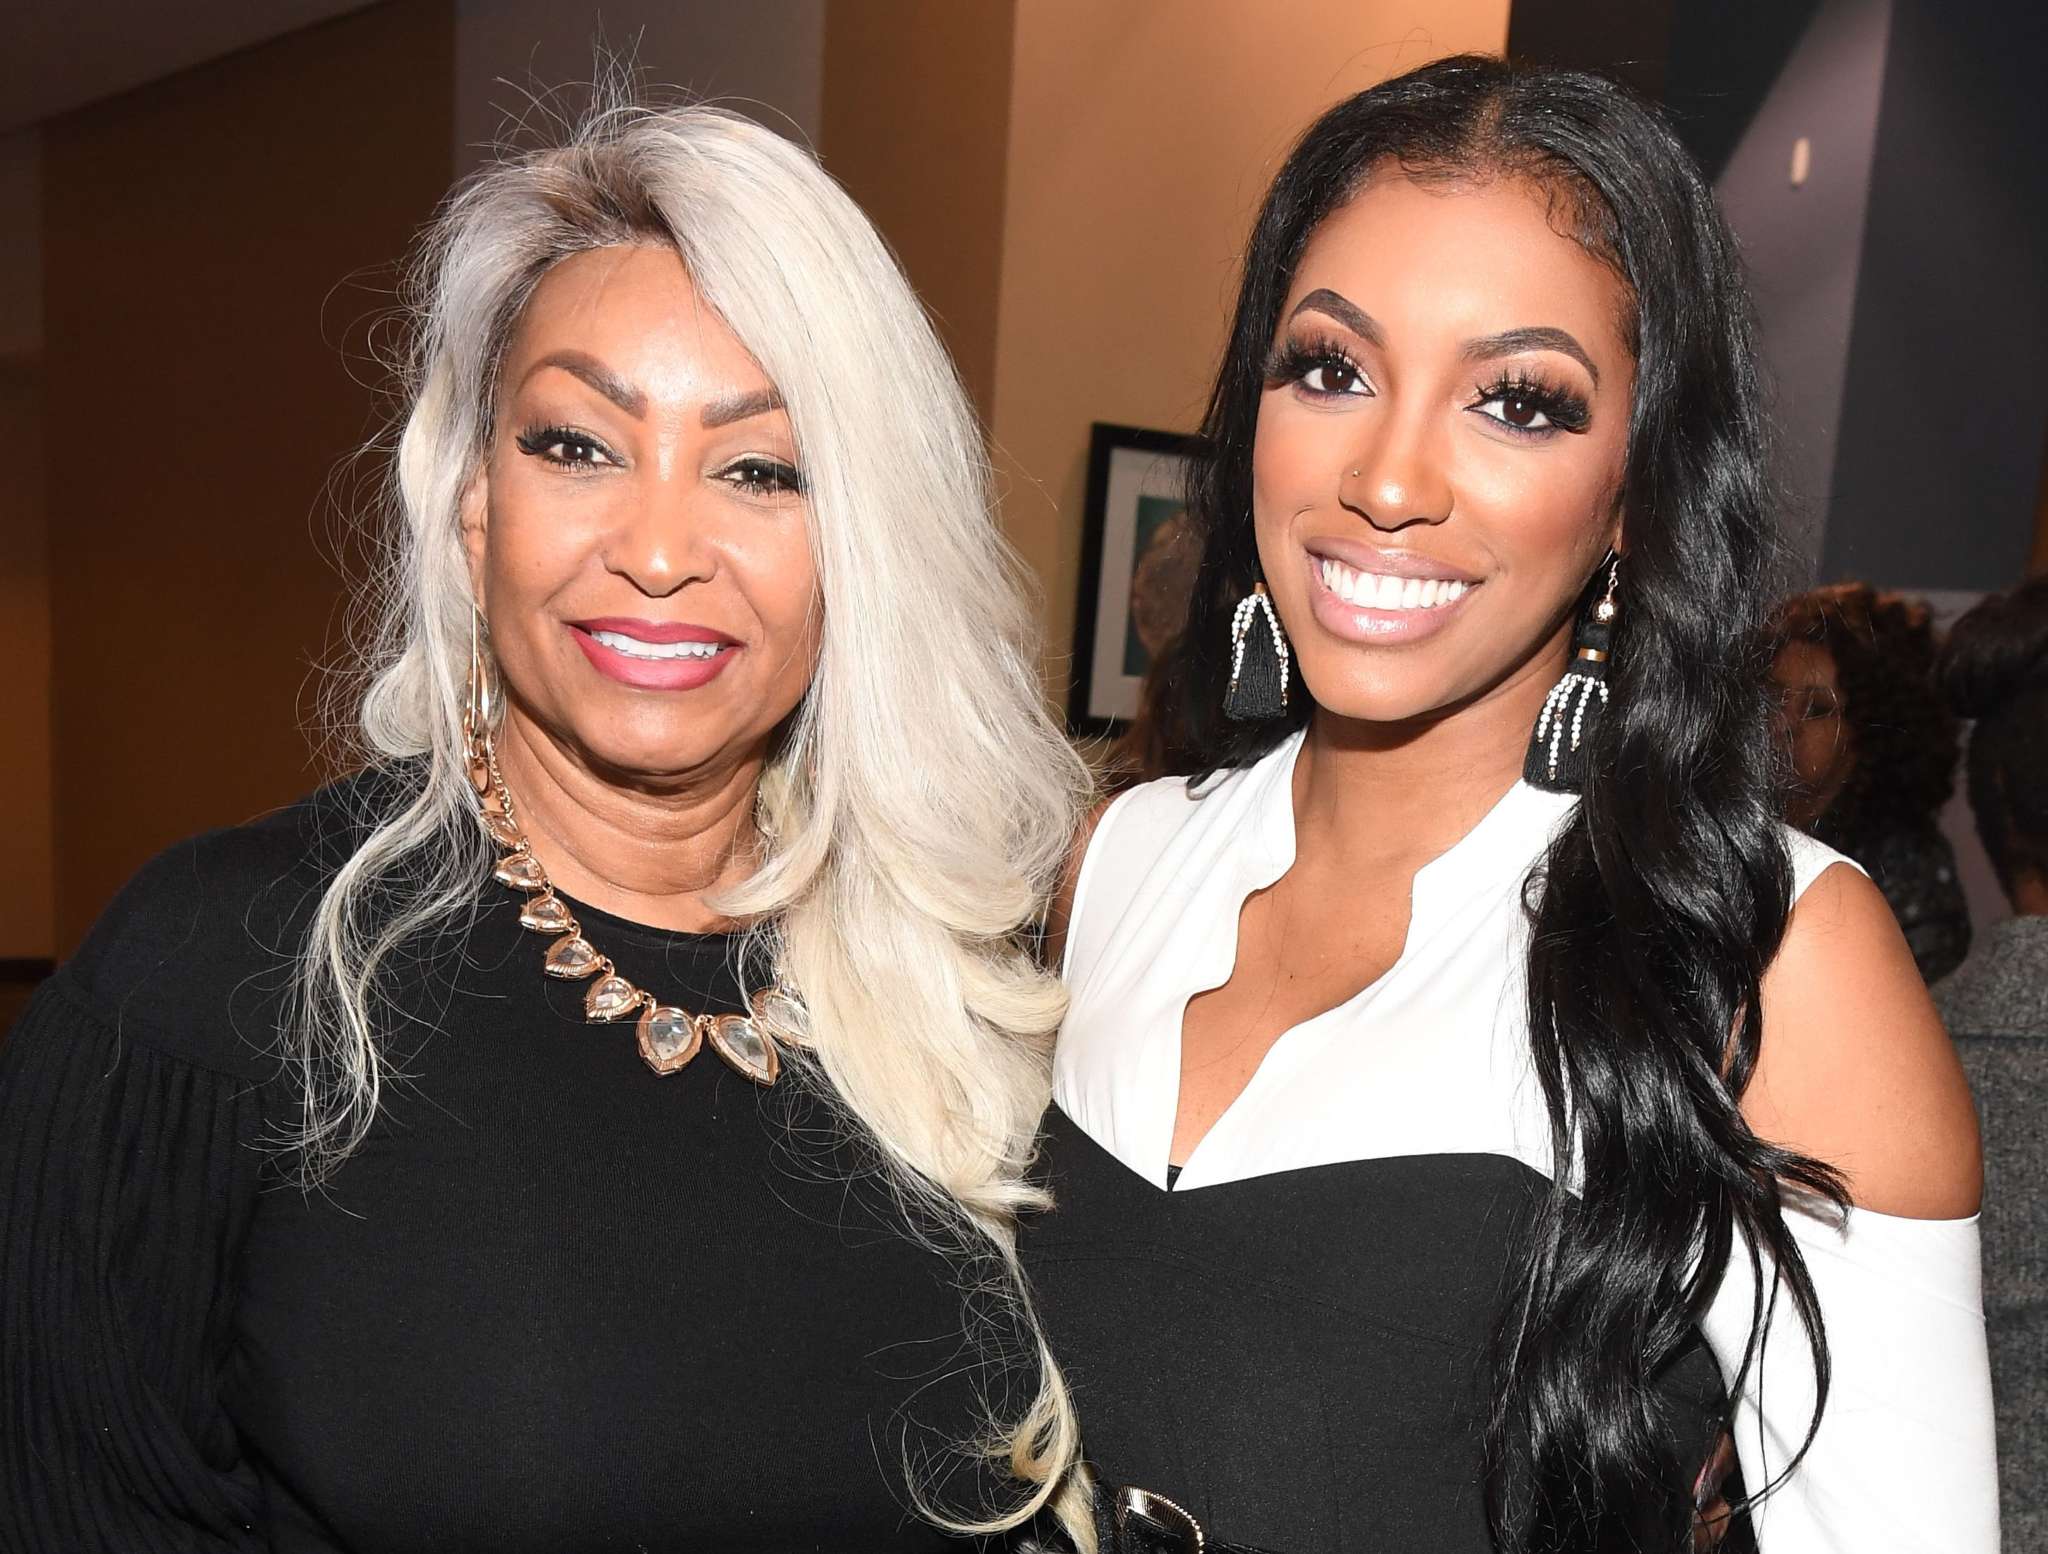 Porsha Williams Celebrates The Birthday Of Her Mom's BF - Check Out Diane's Funny Video With Him